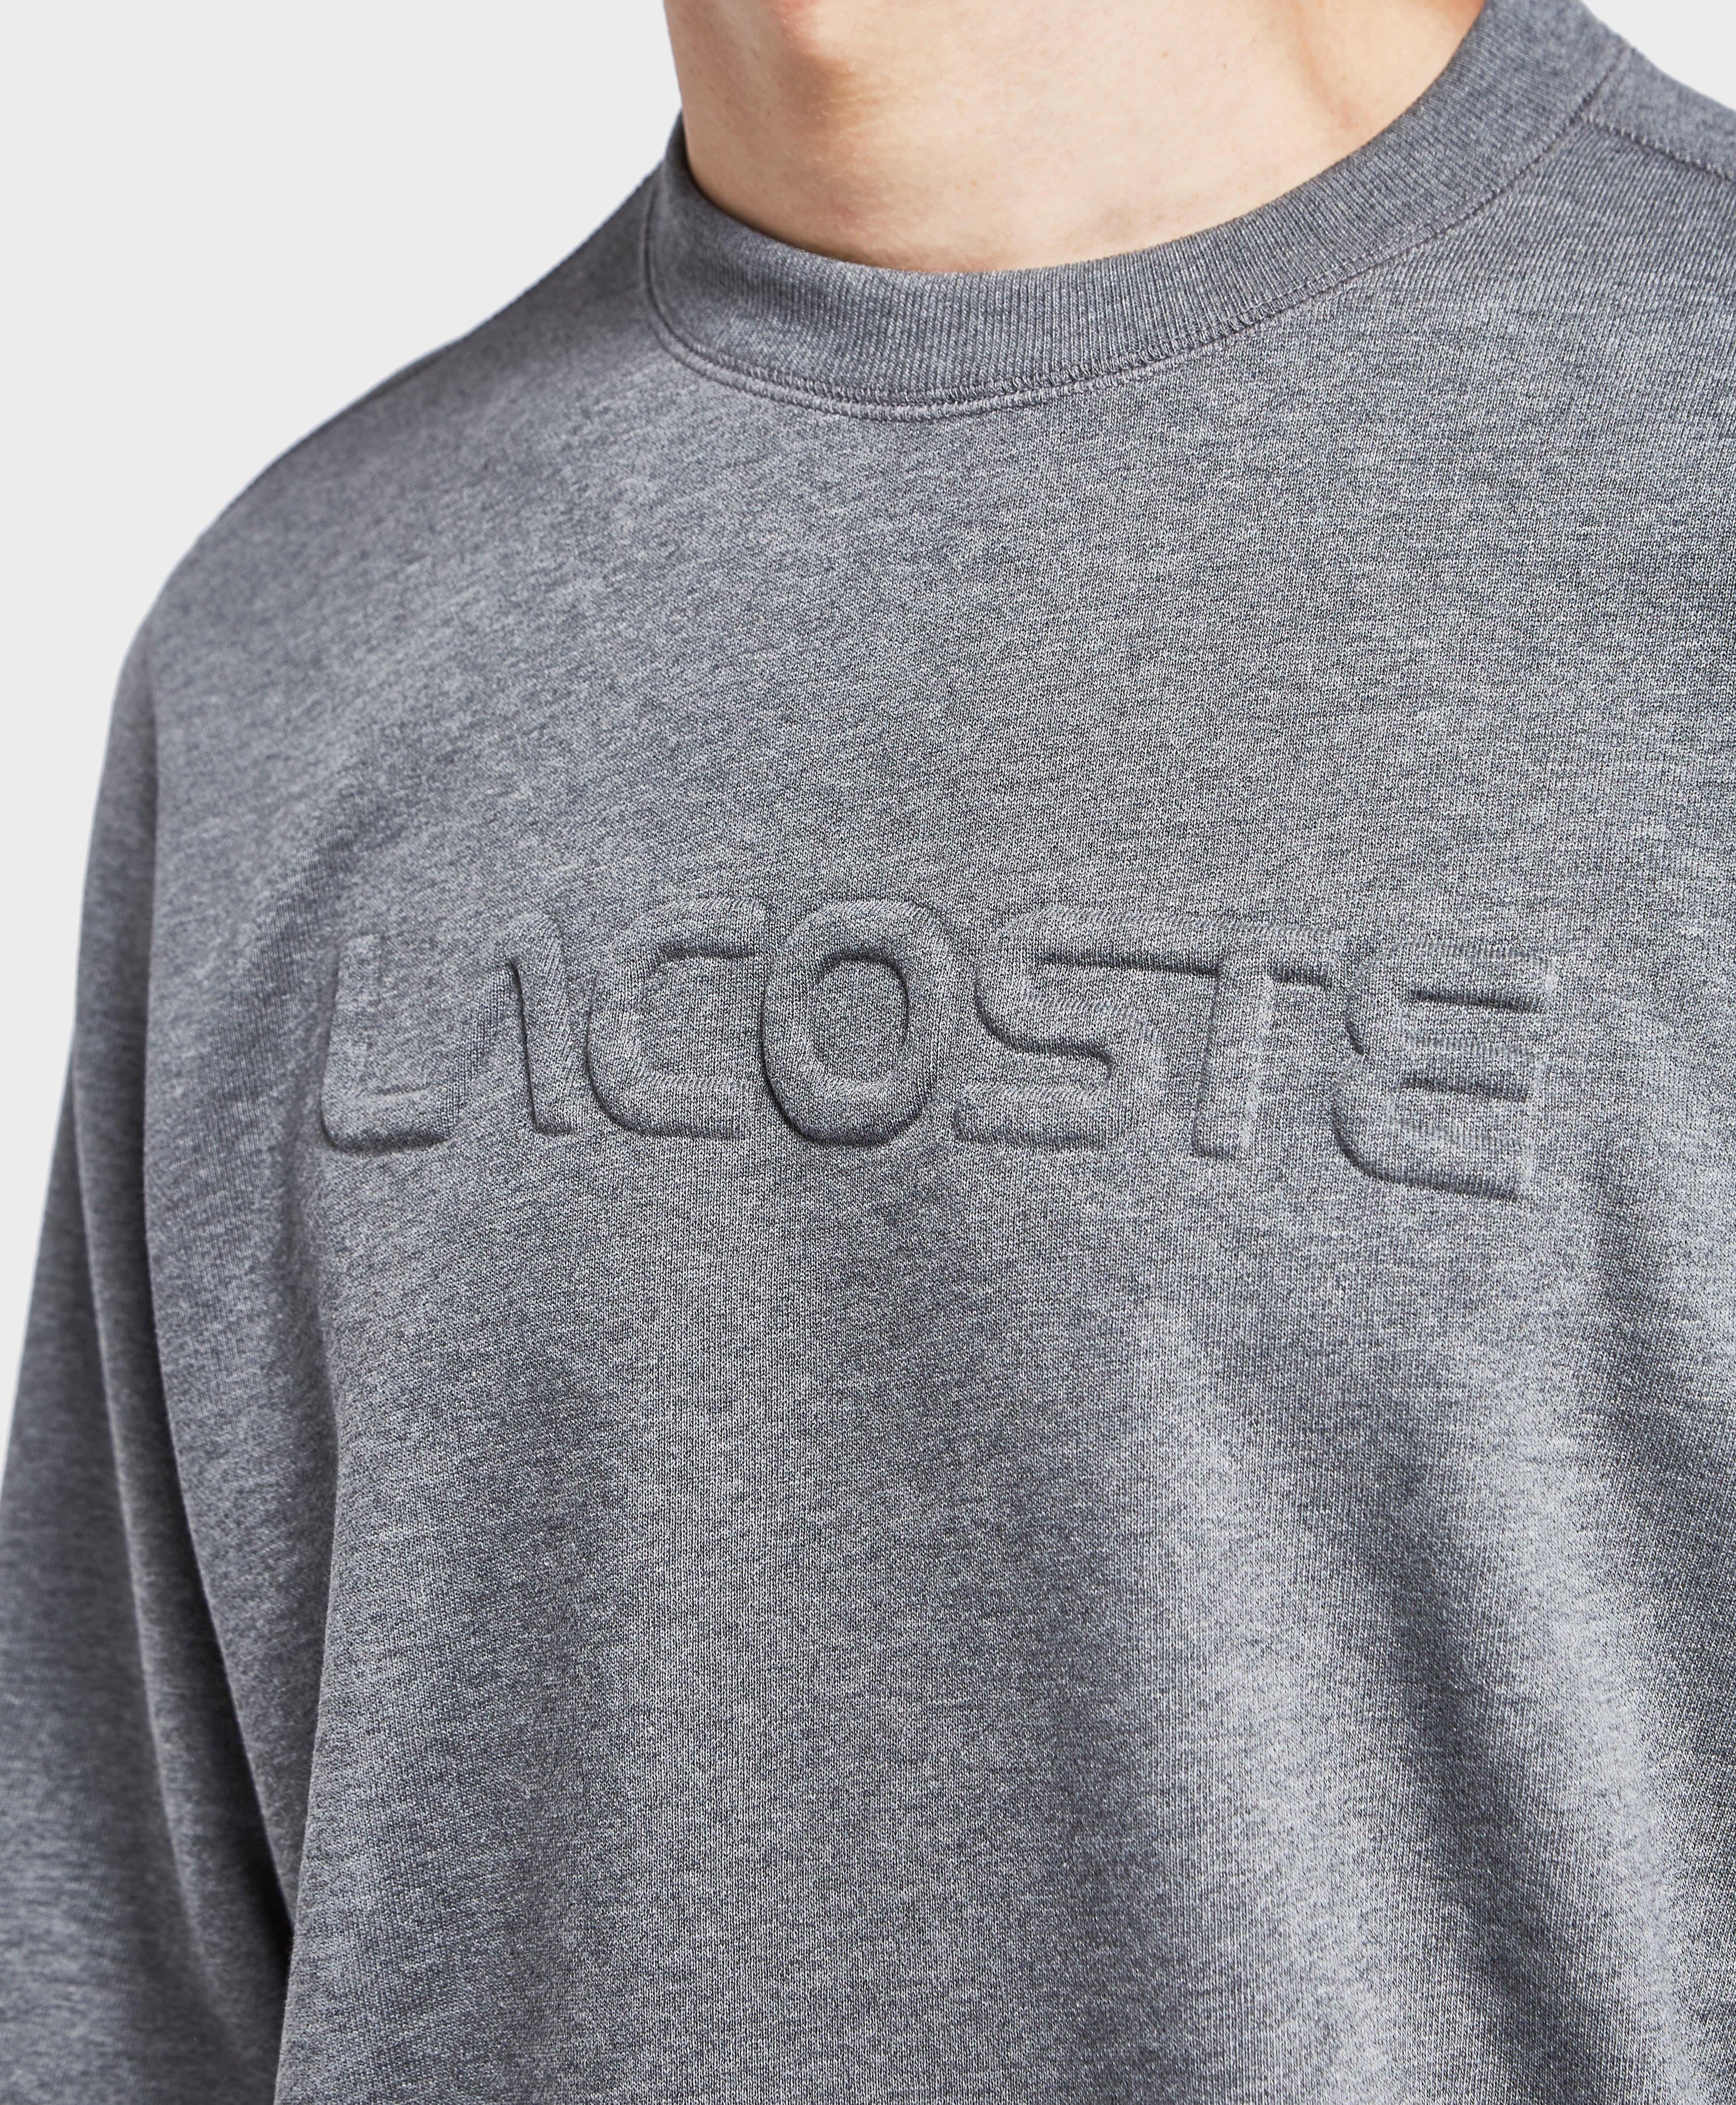 lacoste embossed t shirt